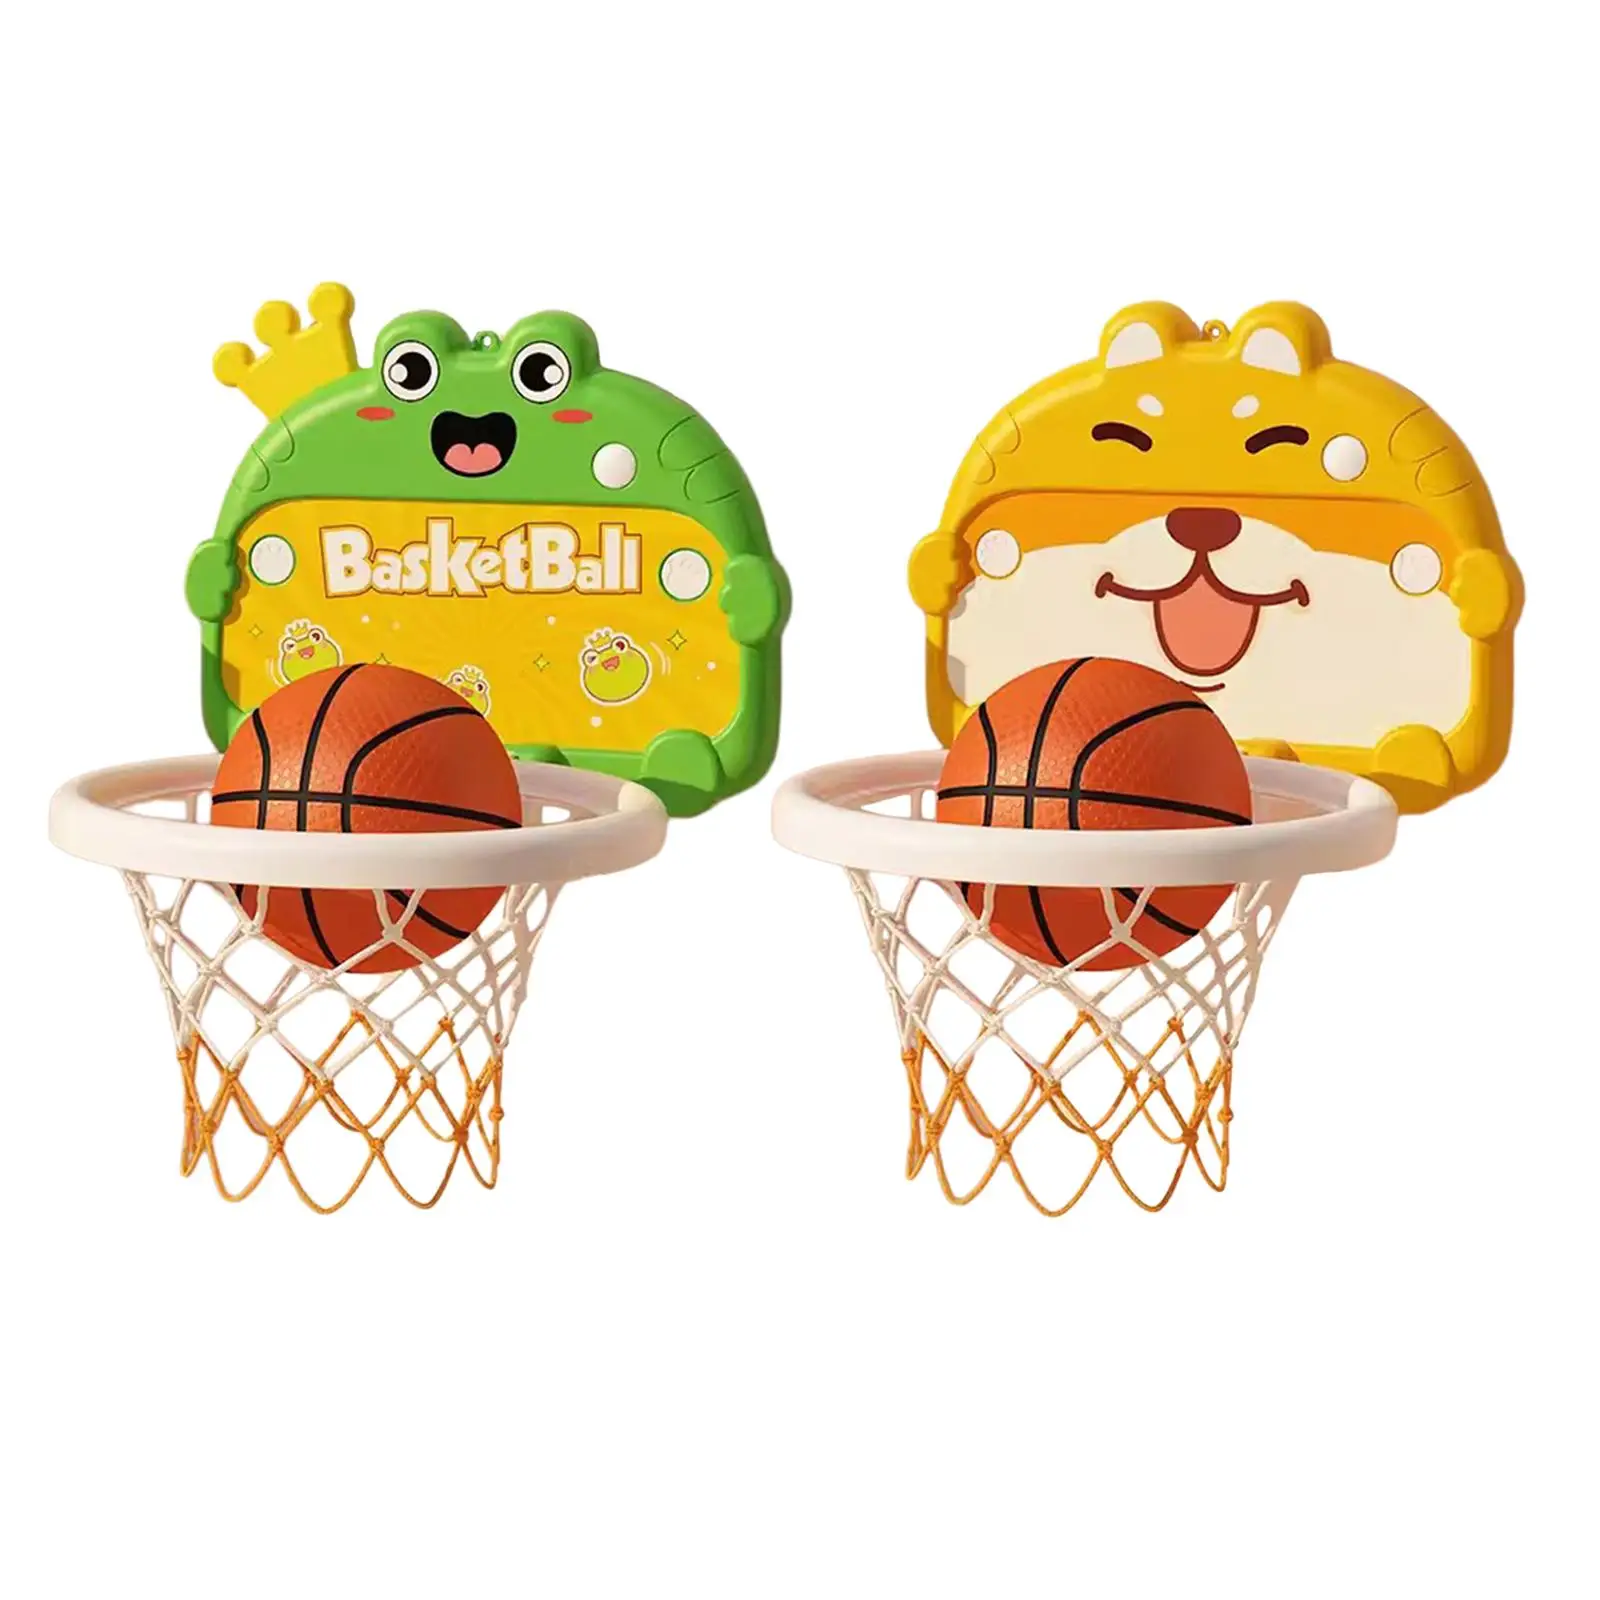 Mini Basketball Hoop Set with Basketball Parent Child Interactive Complete Accessories Family Games for Living Room Door Wall